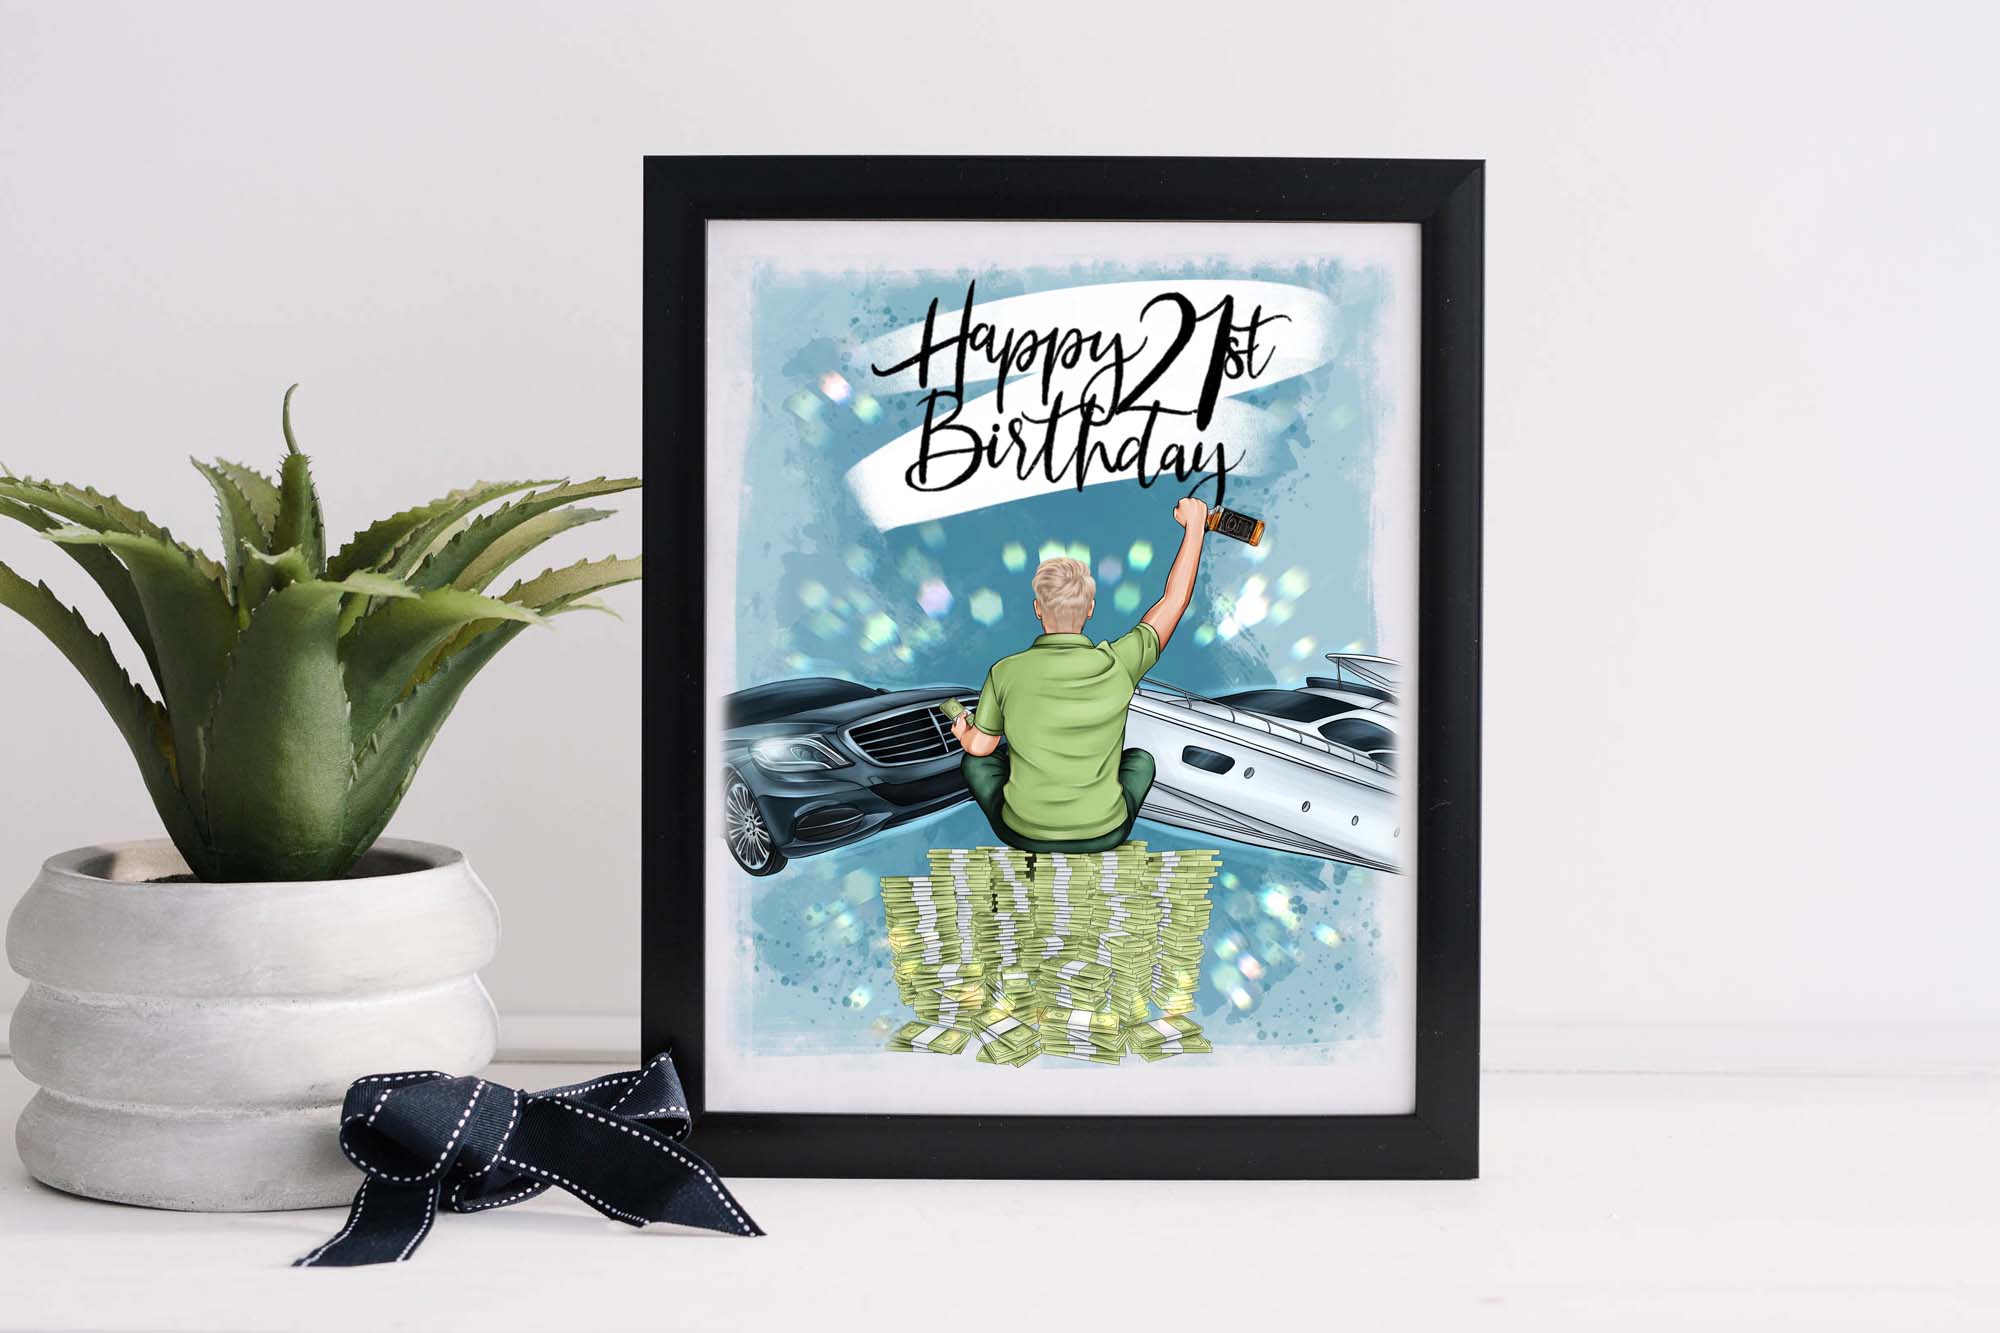 Best Friends Birthday Clipart Poster In A Black Frame.